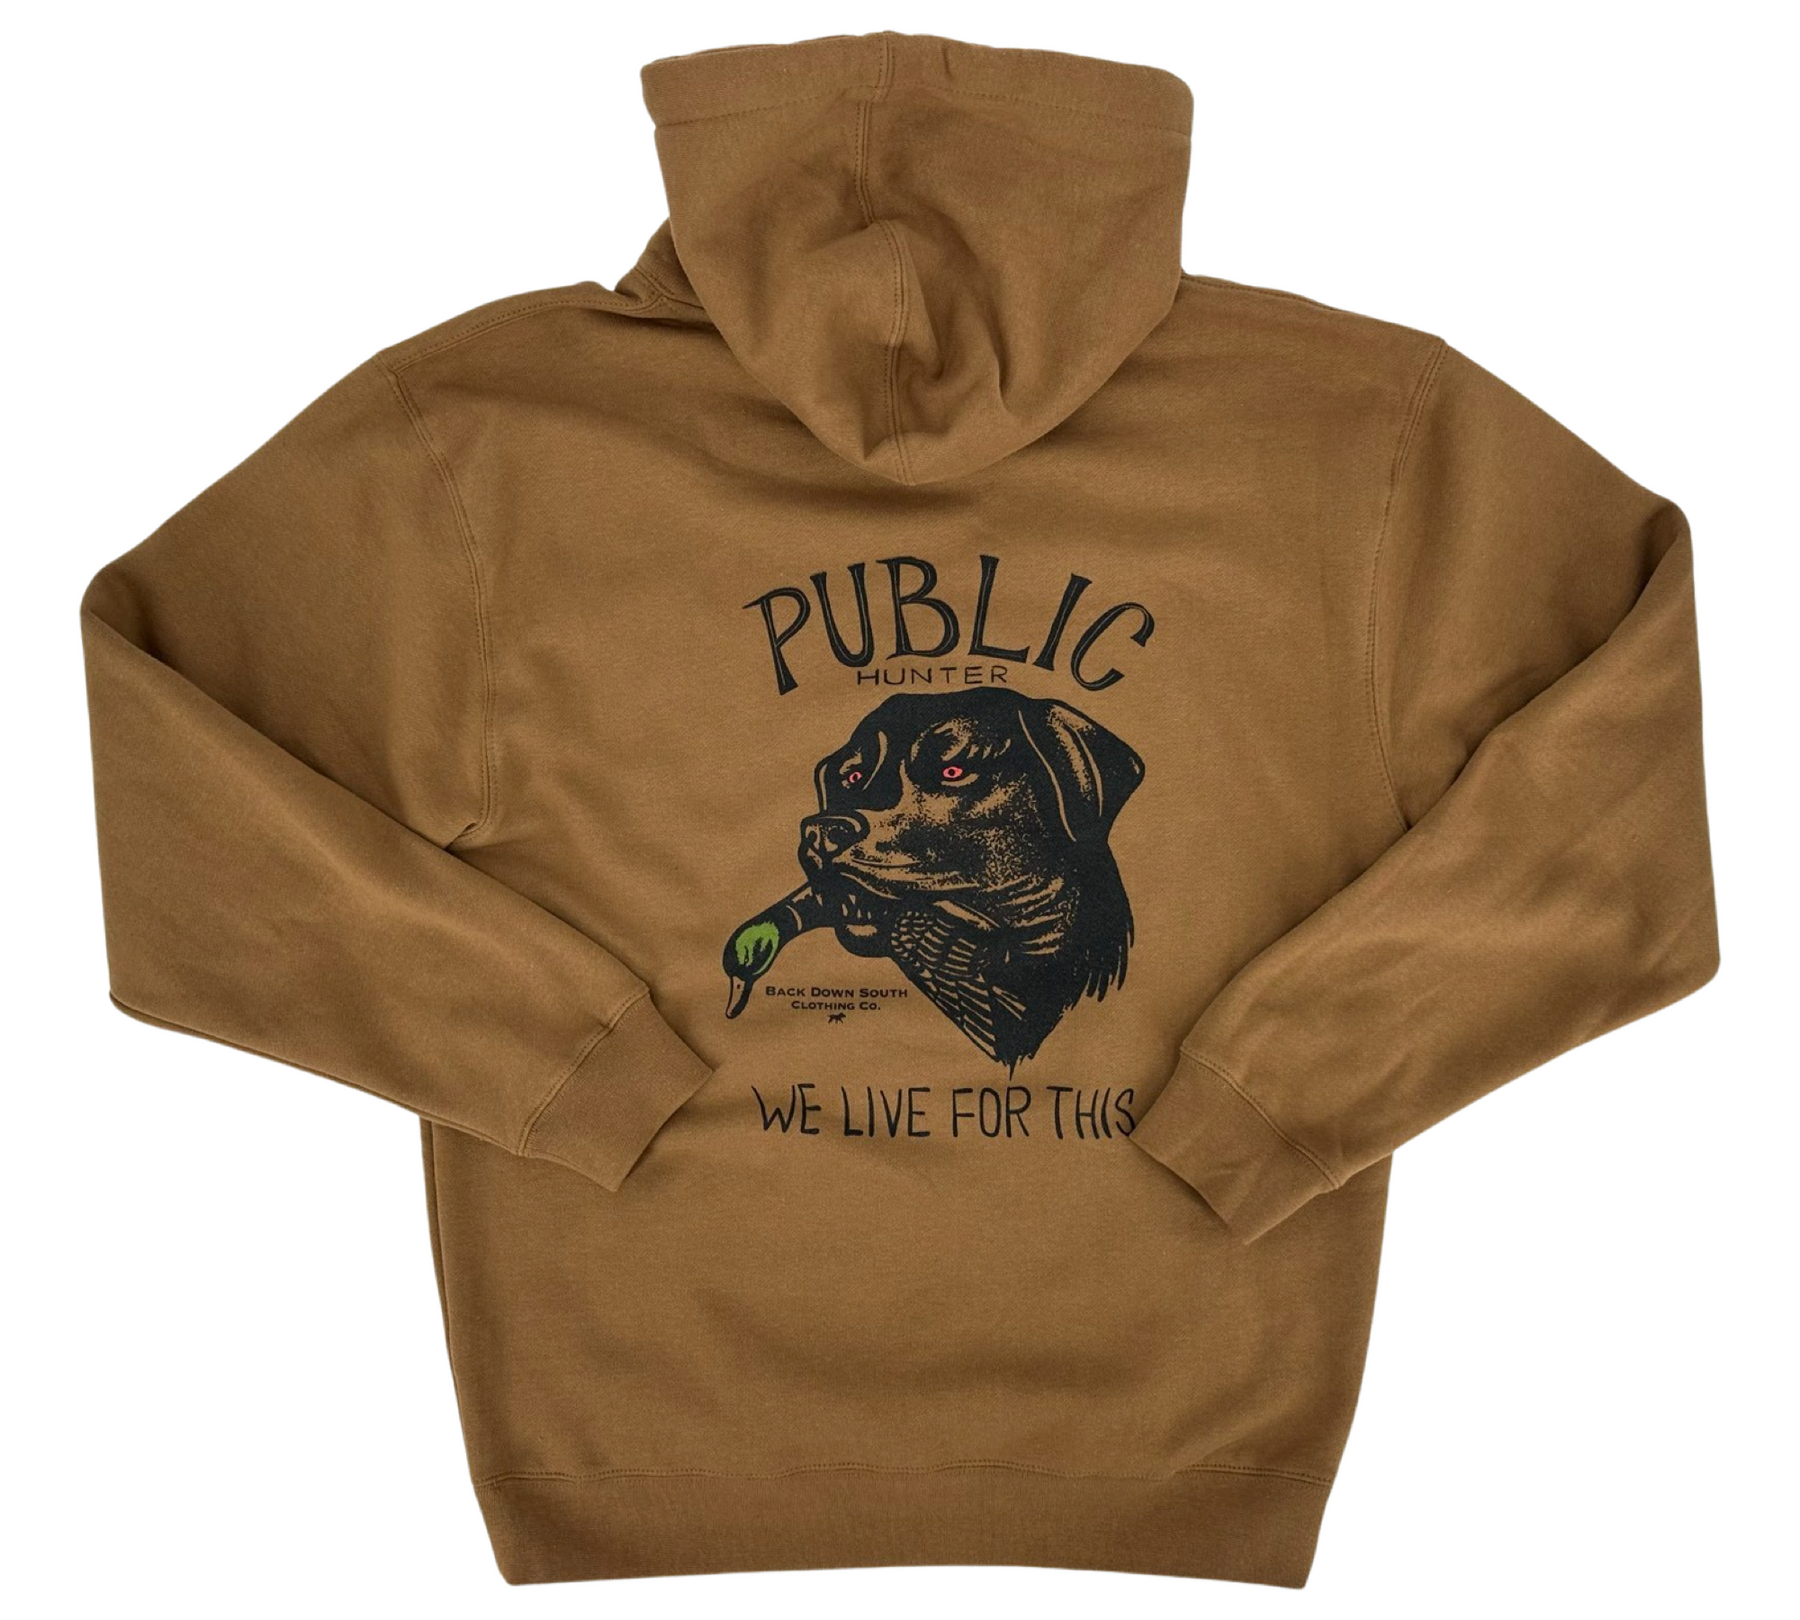 Only Bucks Hoodie – Southern Bred Clothing Co.